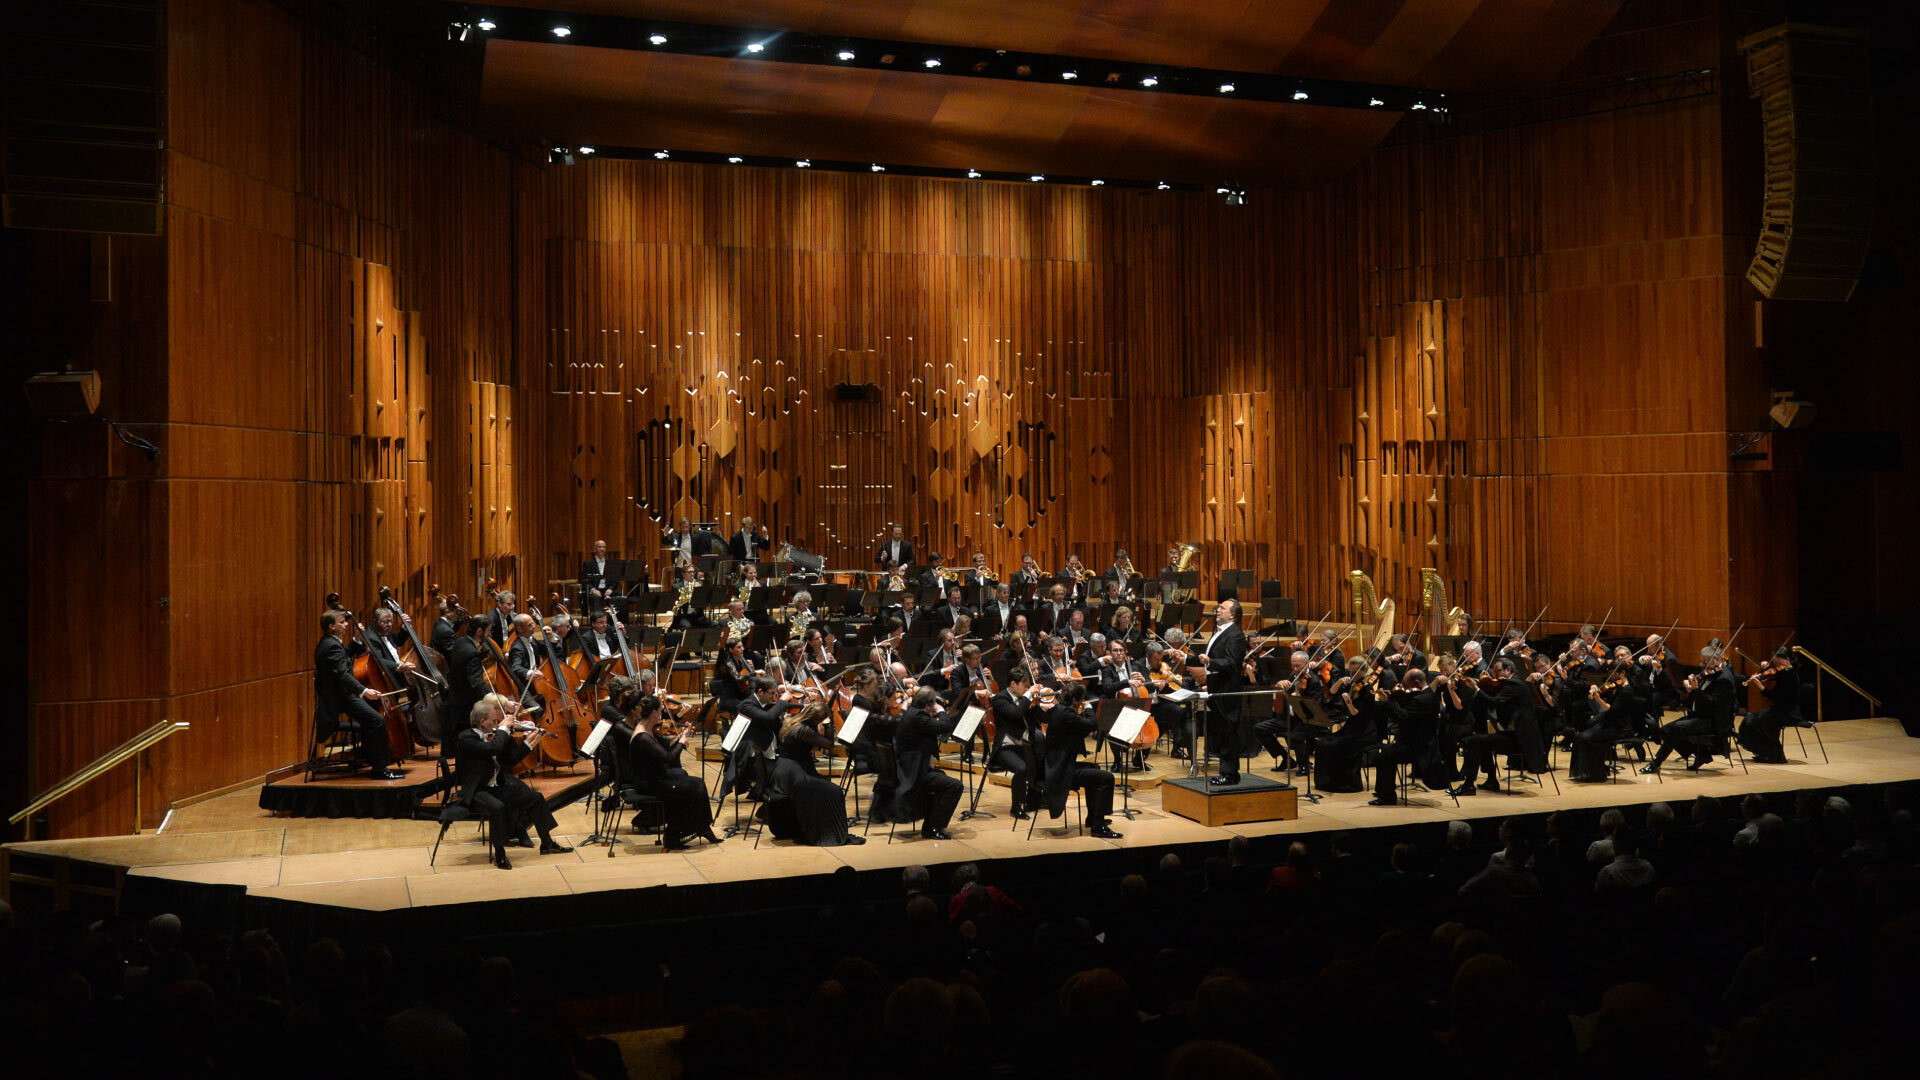 Romantic places for a date in the City - Guildhall School of Music and Drama - live orchestra on stage